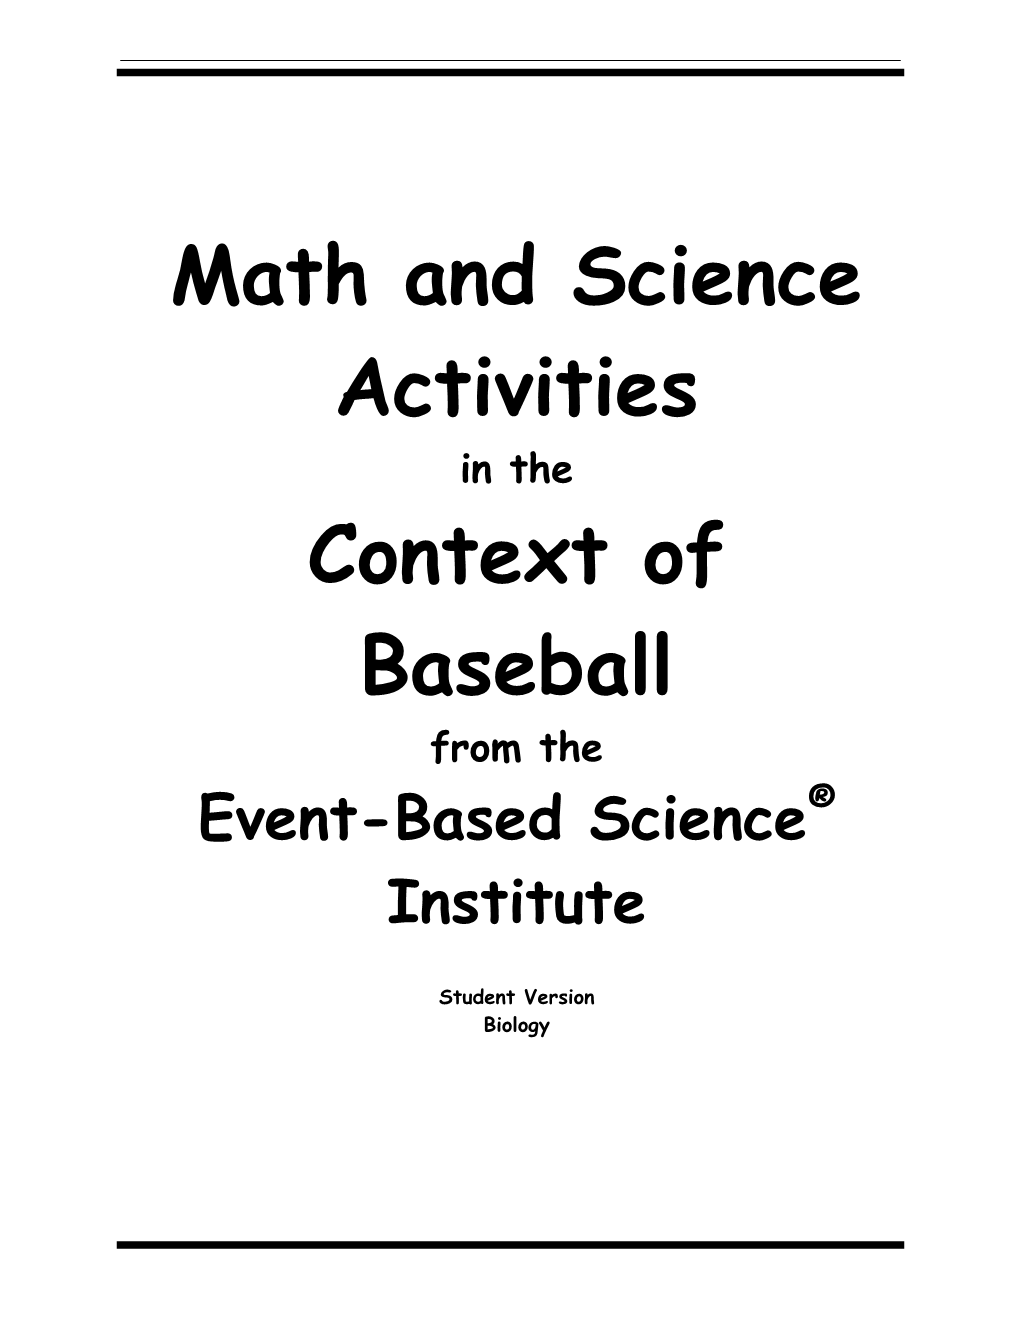 Math and Science Activities